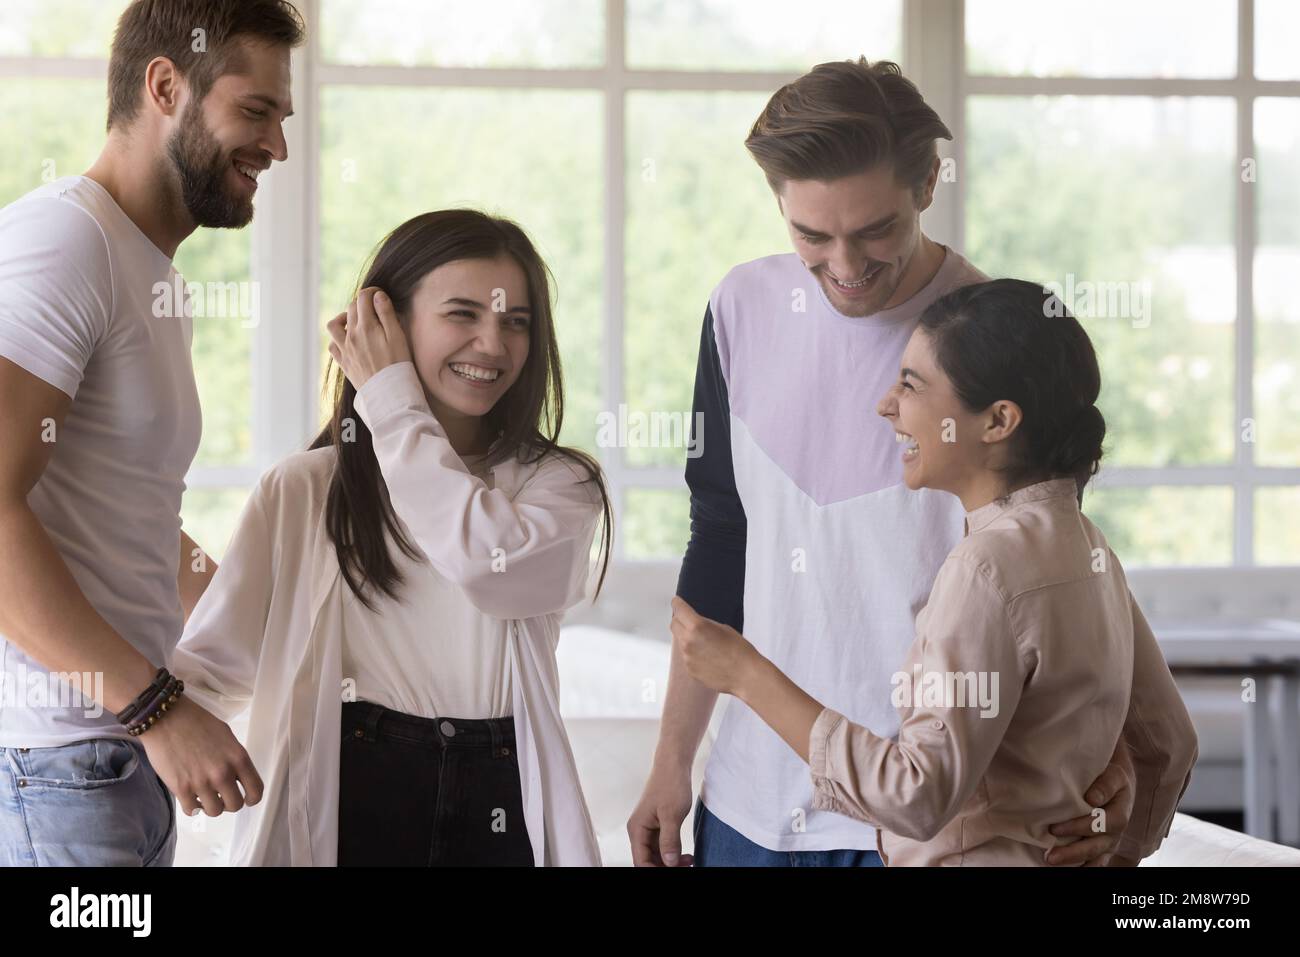 Diverse group of friends standing in cafe interior, chatting Stock Photo